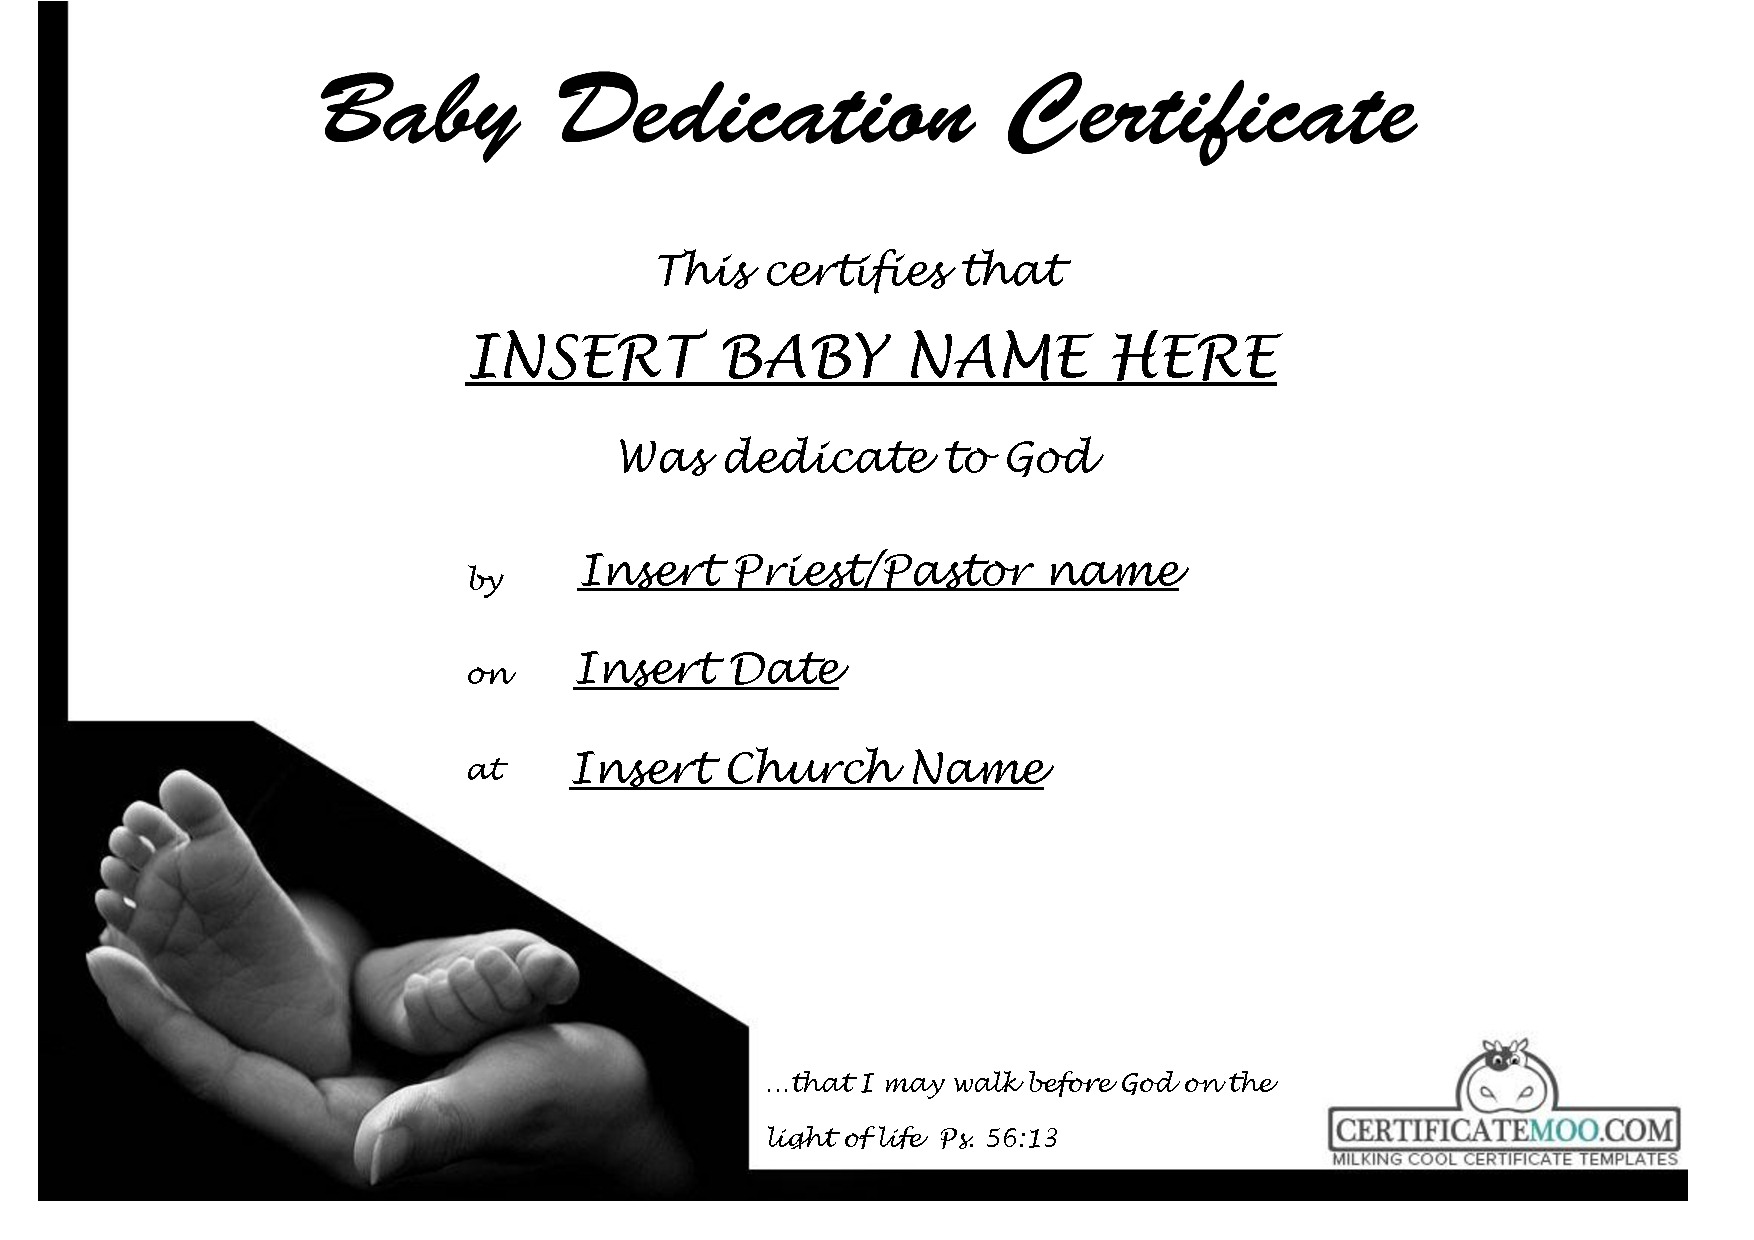 Certificate Templates: Certificate Templates Baby Dedication With Baby Christening Certificate Template